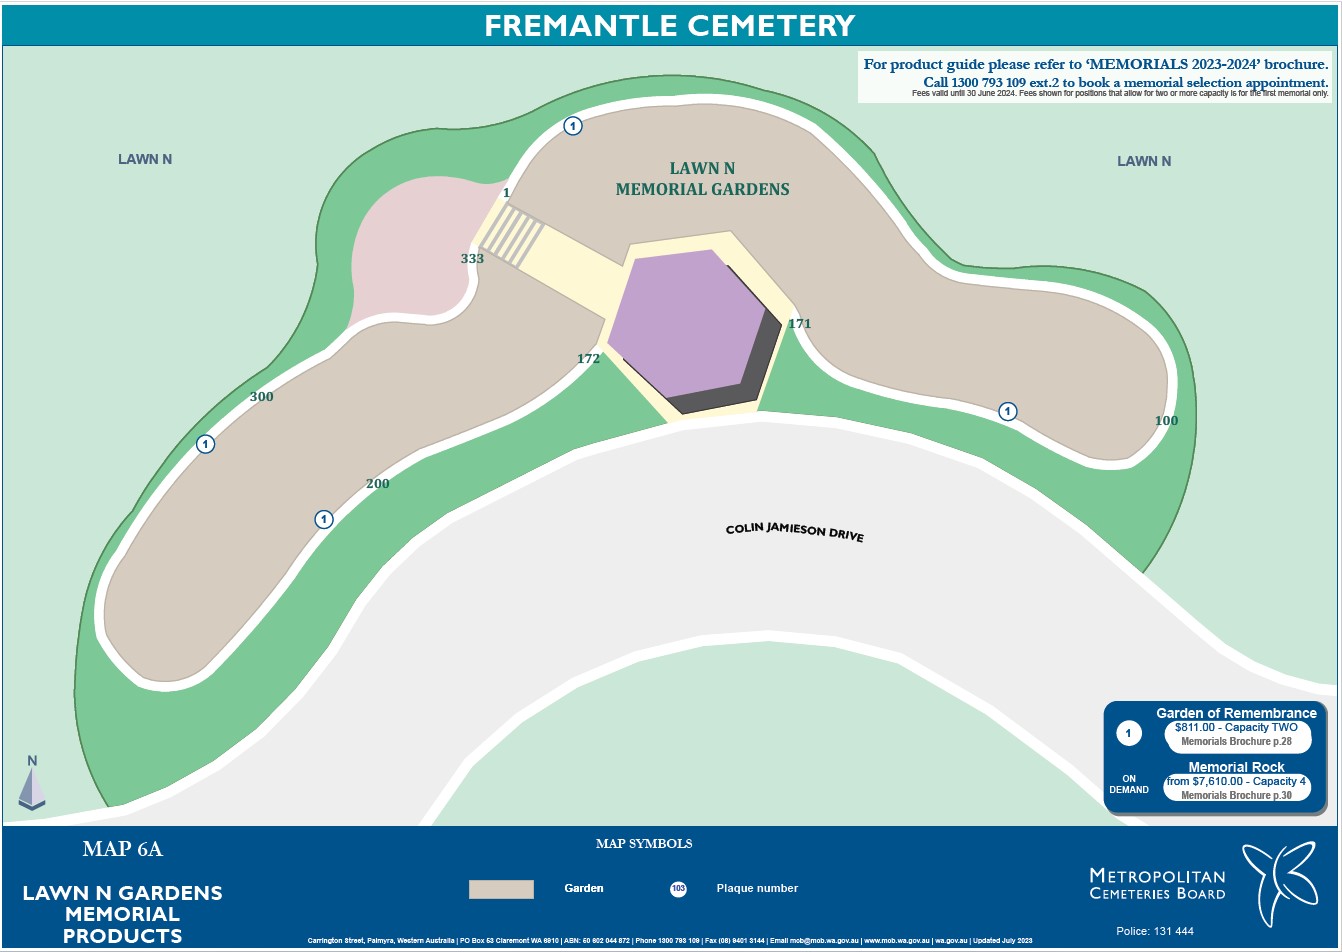 Map 6A :awn N Gardens Memorial Products Fremantle Cemetery